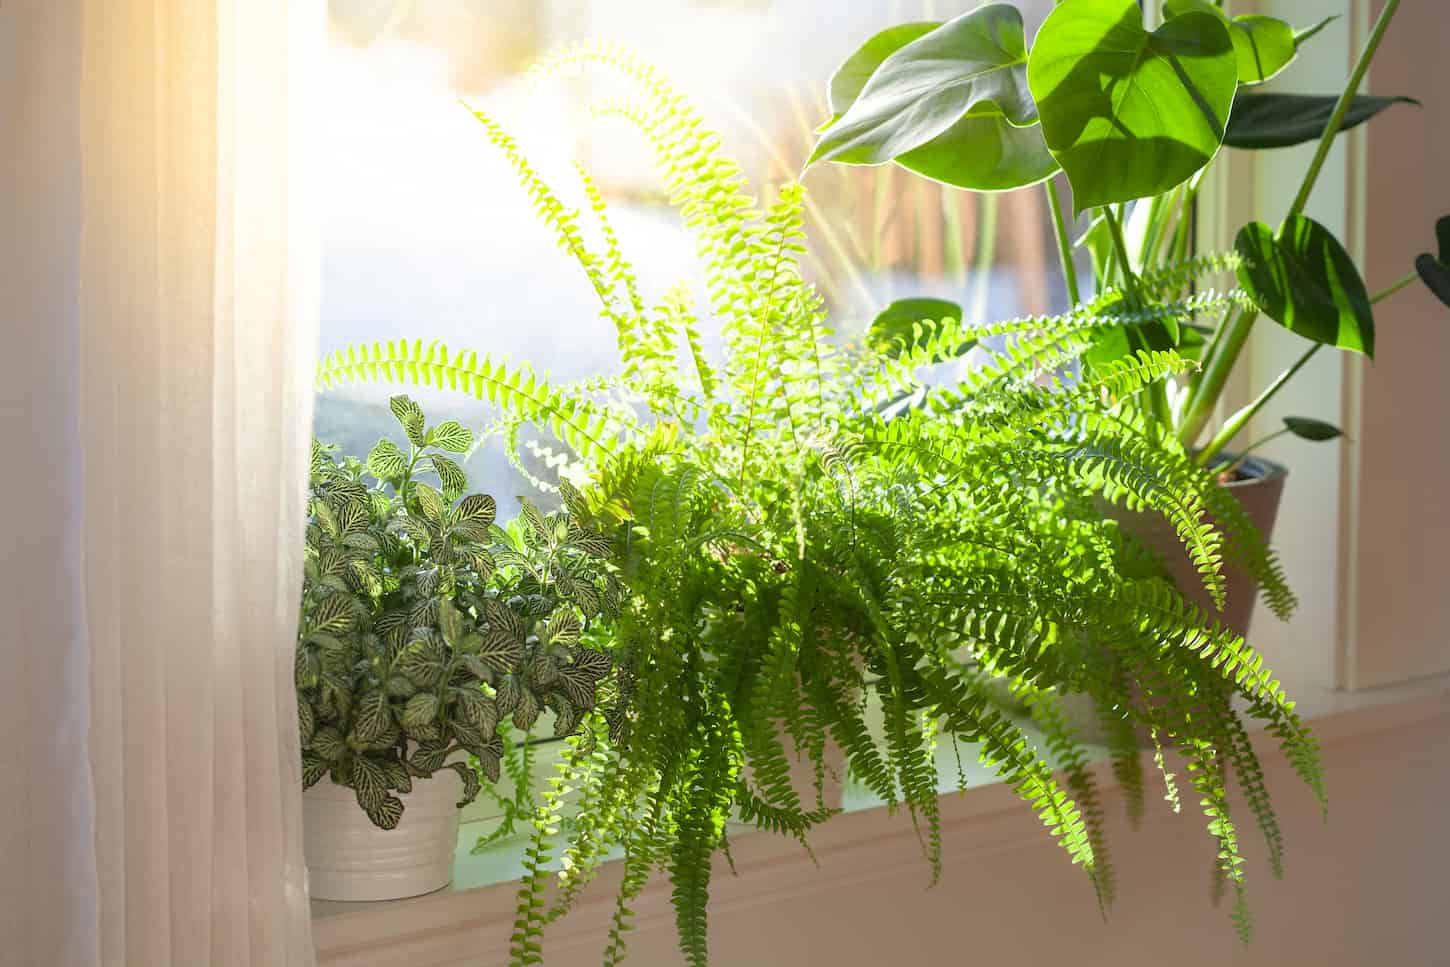 An image of various houseplants such as Fittonia, Nephrolepis, and monstera in white flowerpots on a window.